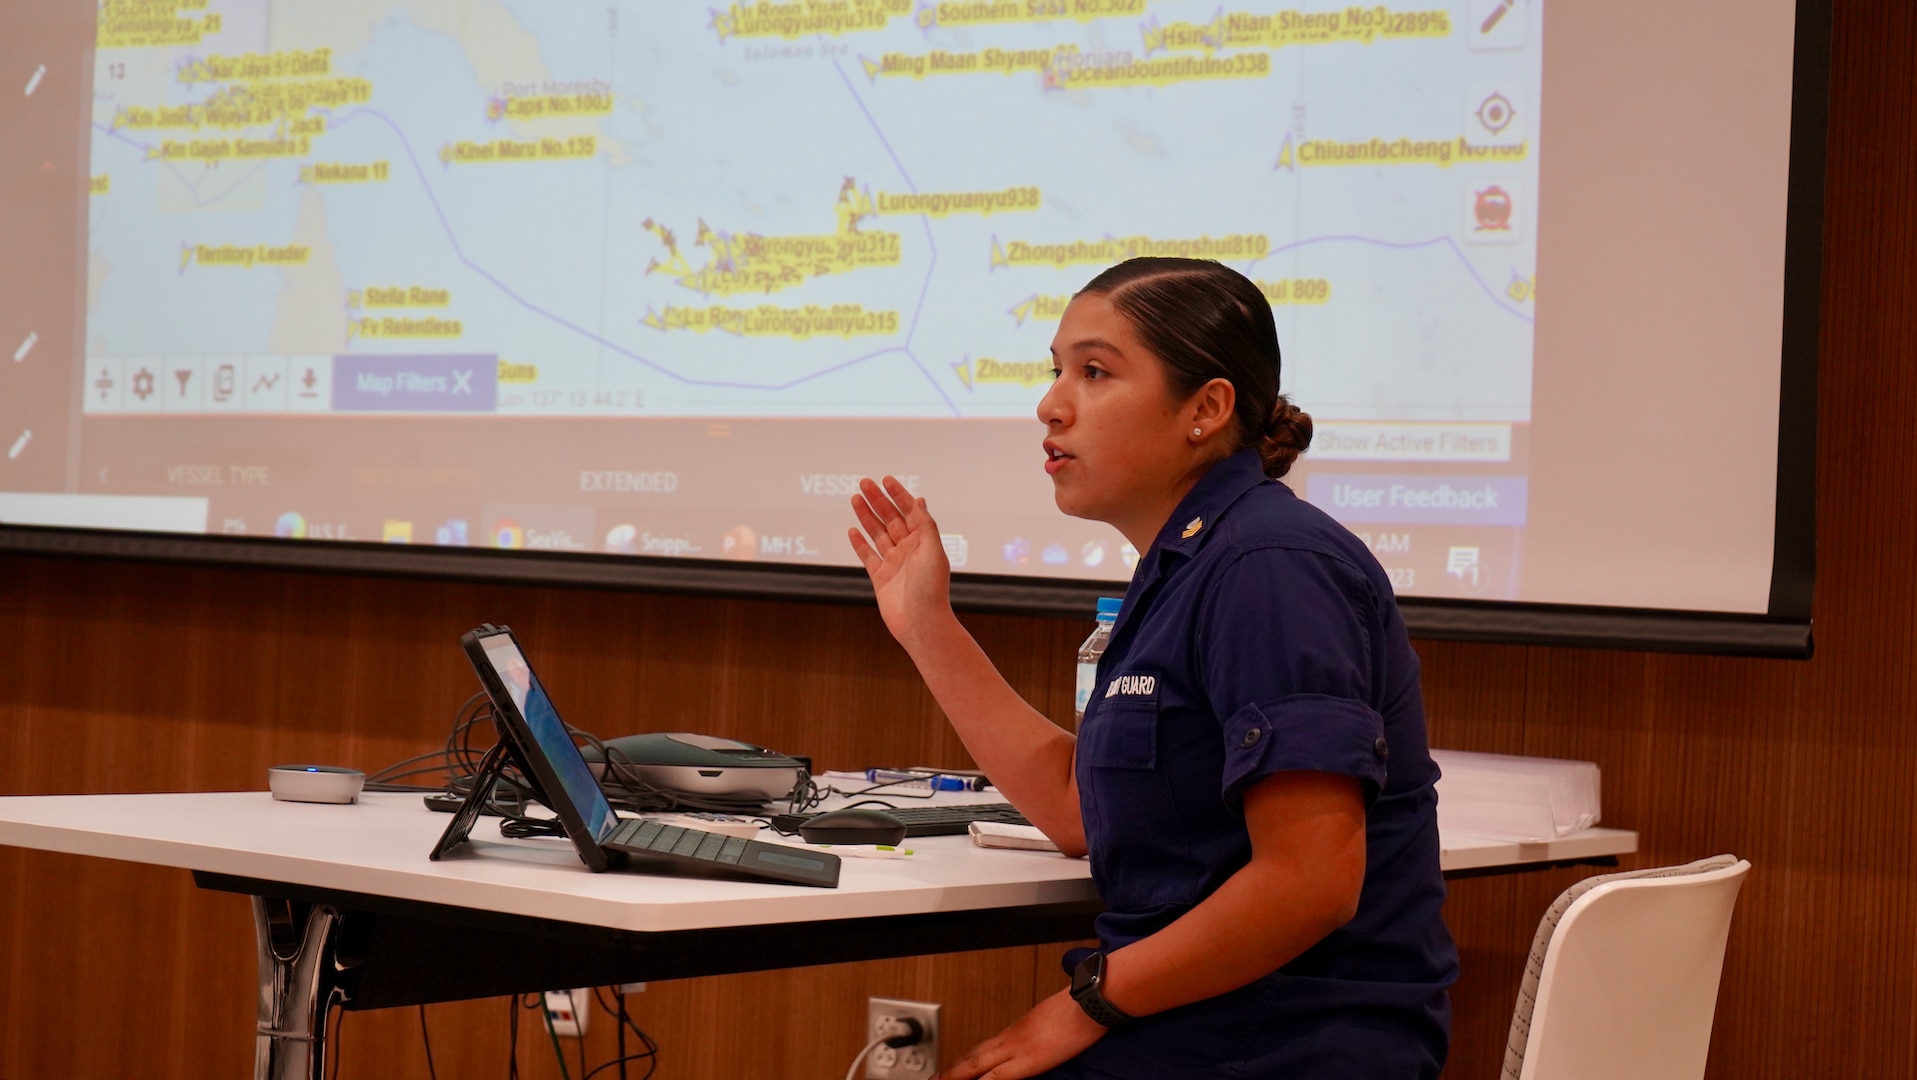 Petty Officer 1st Class Monse Rivera of U.S. Coast Guard 14th District gives partners an overview of maritime domain awareness tools during a subject matter exchange in Port Moresby, Papua New Guinea, on Aug. 17, 2023. The U.S. Coast Guard is in Papua New Guinea at the invitation of the PNG government to join their lead in maritime operations to combat illegal fishing and safeguard maritime resources following the recent signing and ratification of the bilateral agreement between the United States and Papua New Guinea. (U.S. Coast Guard photo by Chief Warrant Officer Sara Muir)